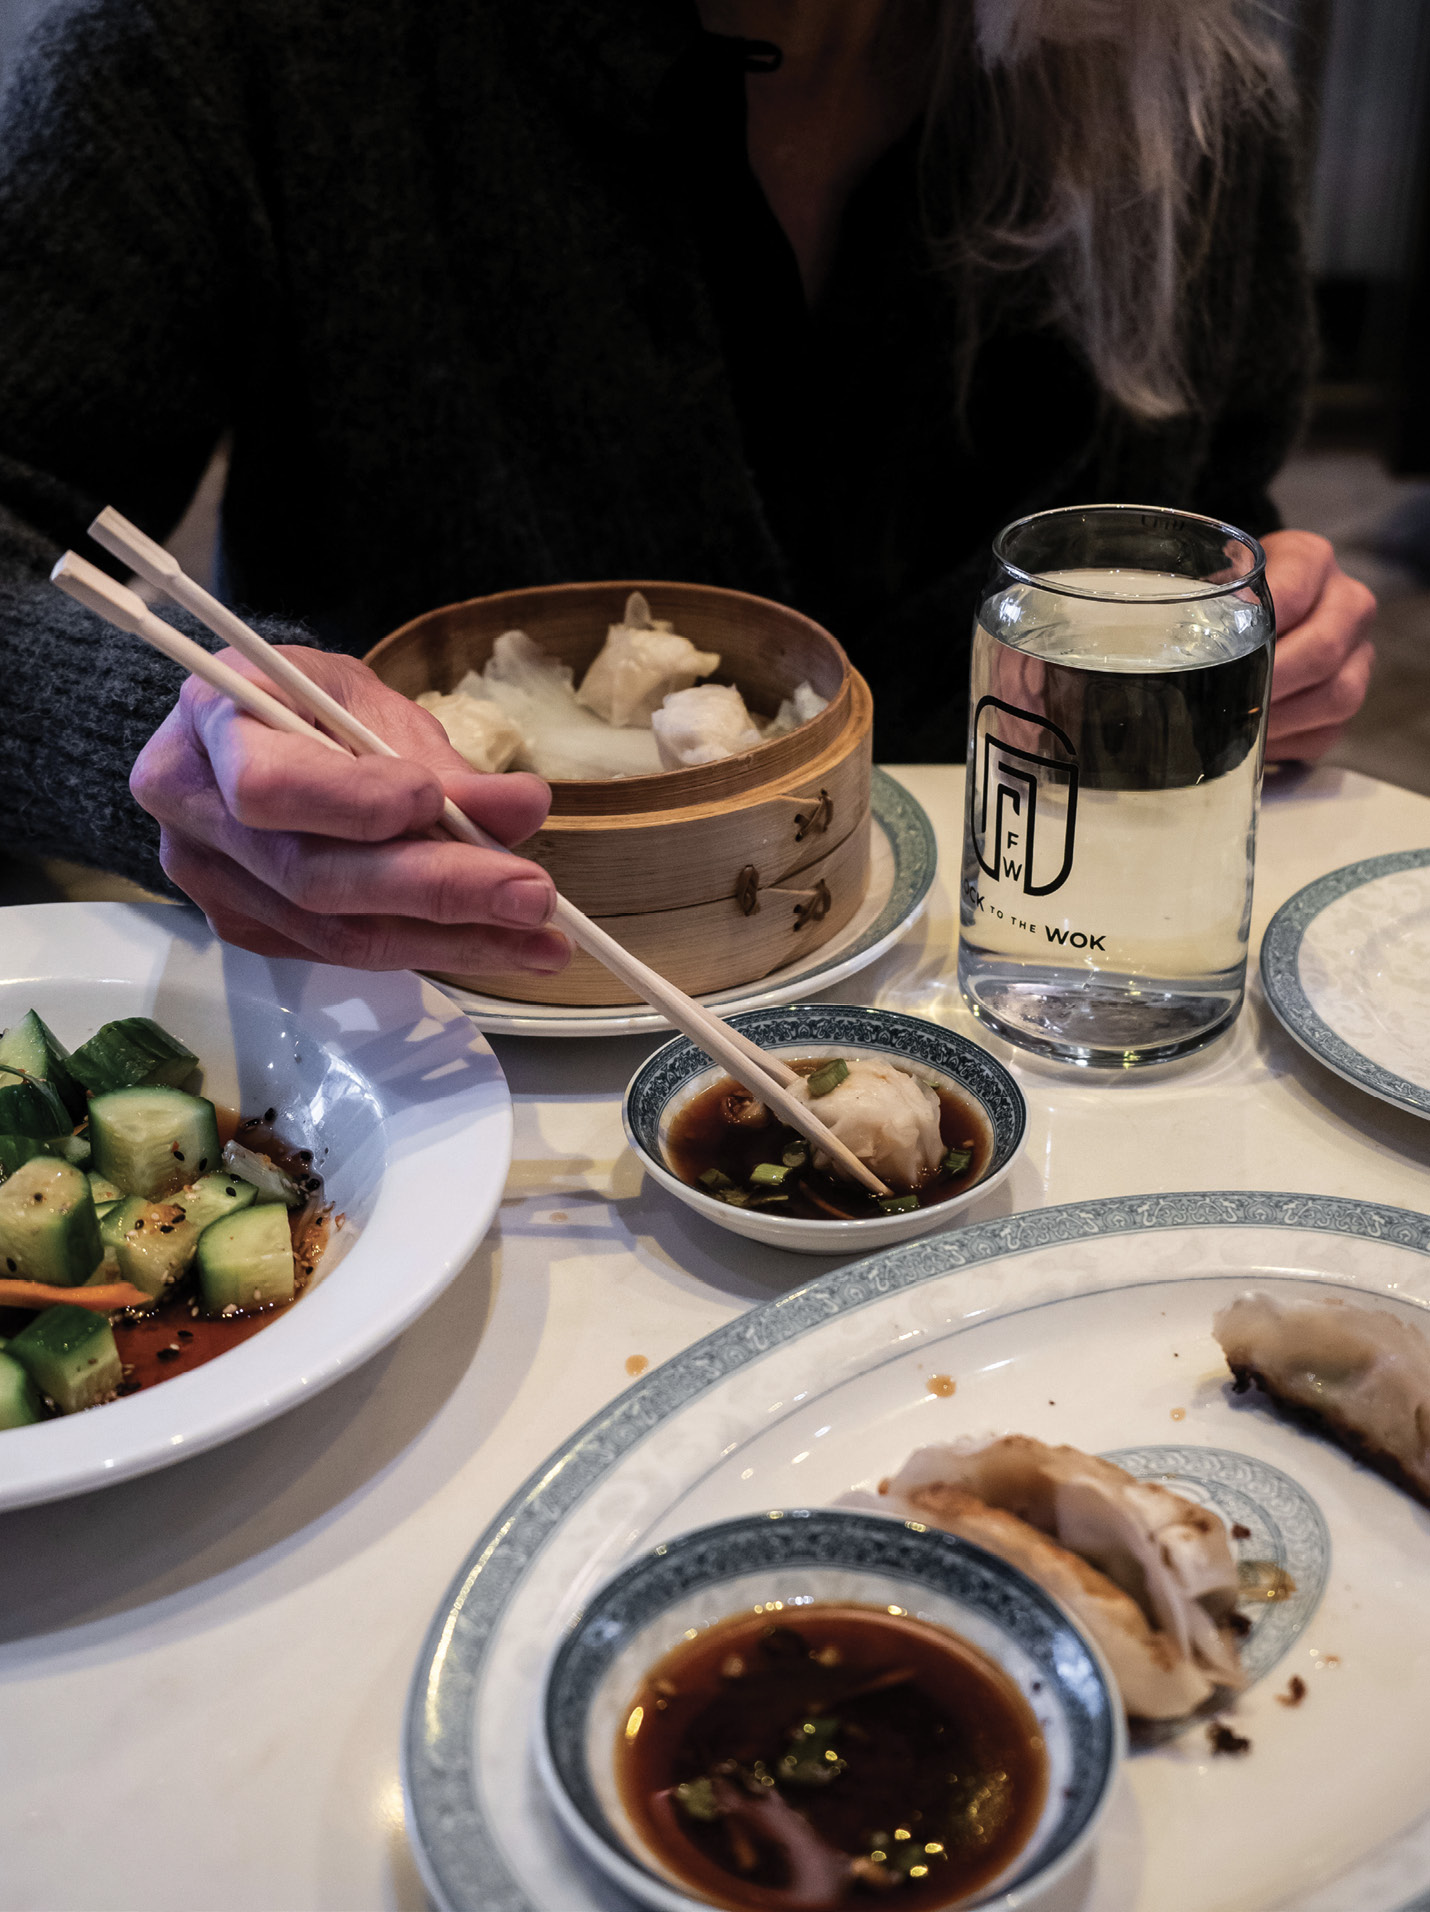 House-made dumplings at Flock to the Wok, a new hot spot on Whitaker Street